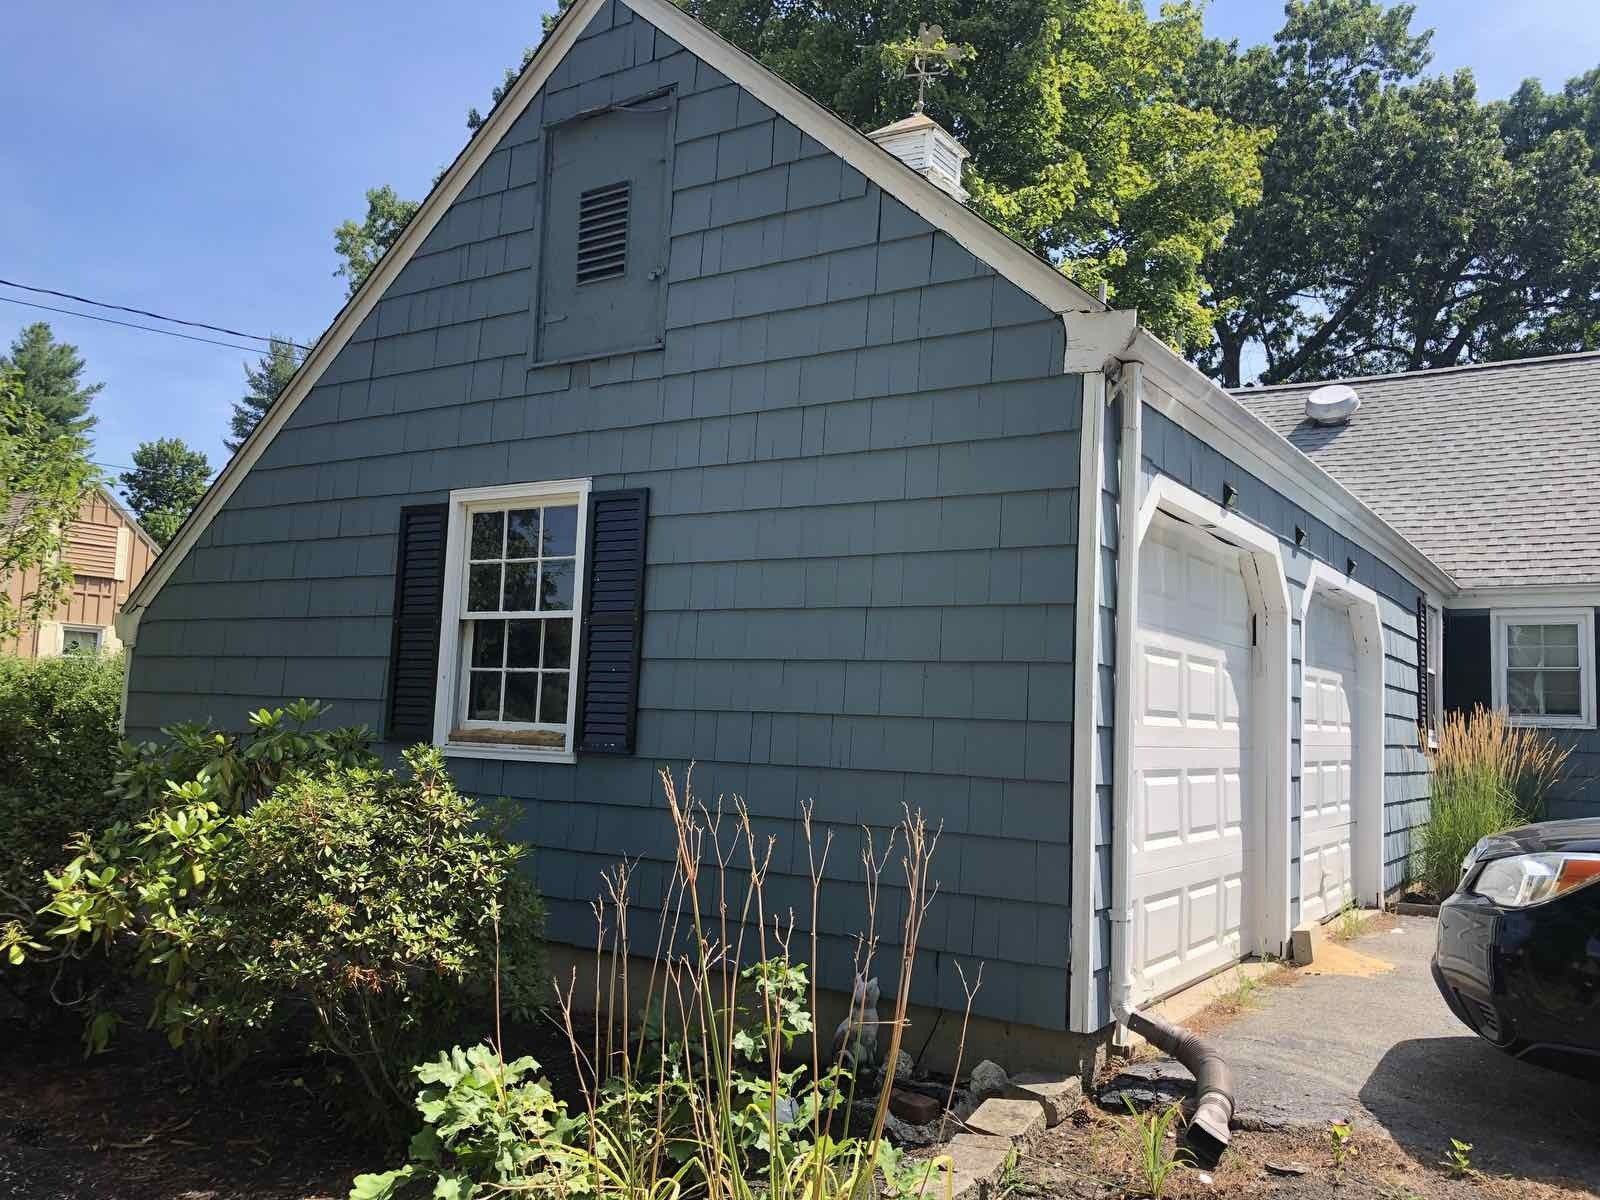 Baby blue wooden shake siding to be replaced with new baby blue horizontal vinyl siding.